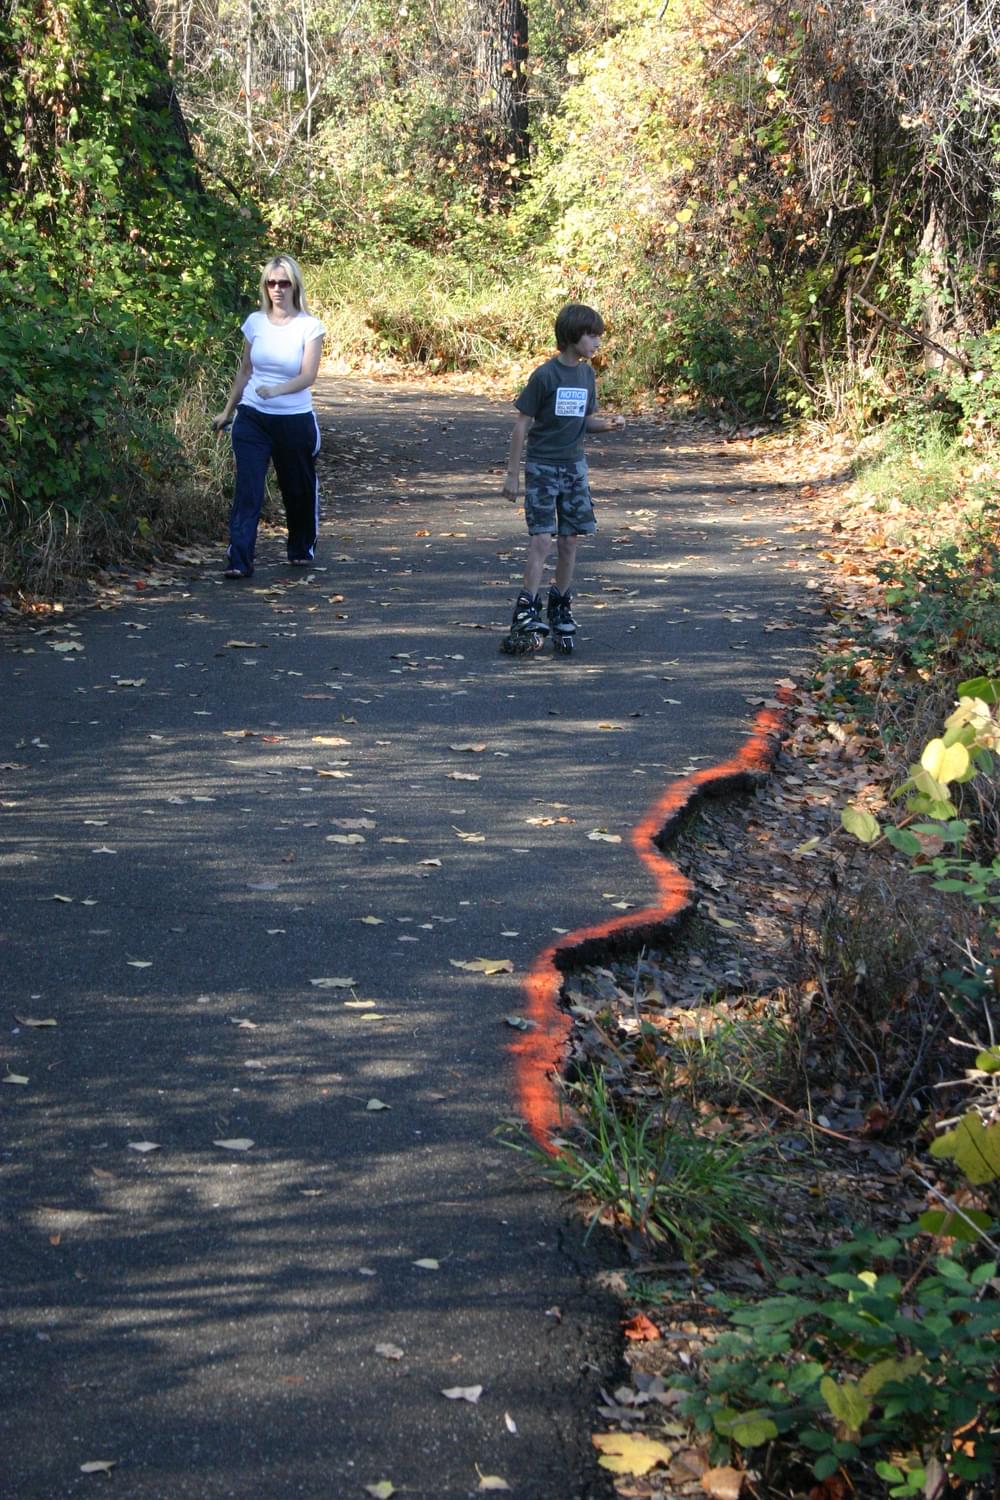 Dayglo paint alerts trail users of drop-off; Sacramento River Trail, Redding, California